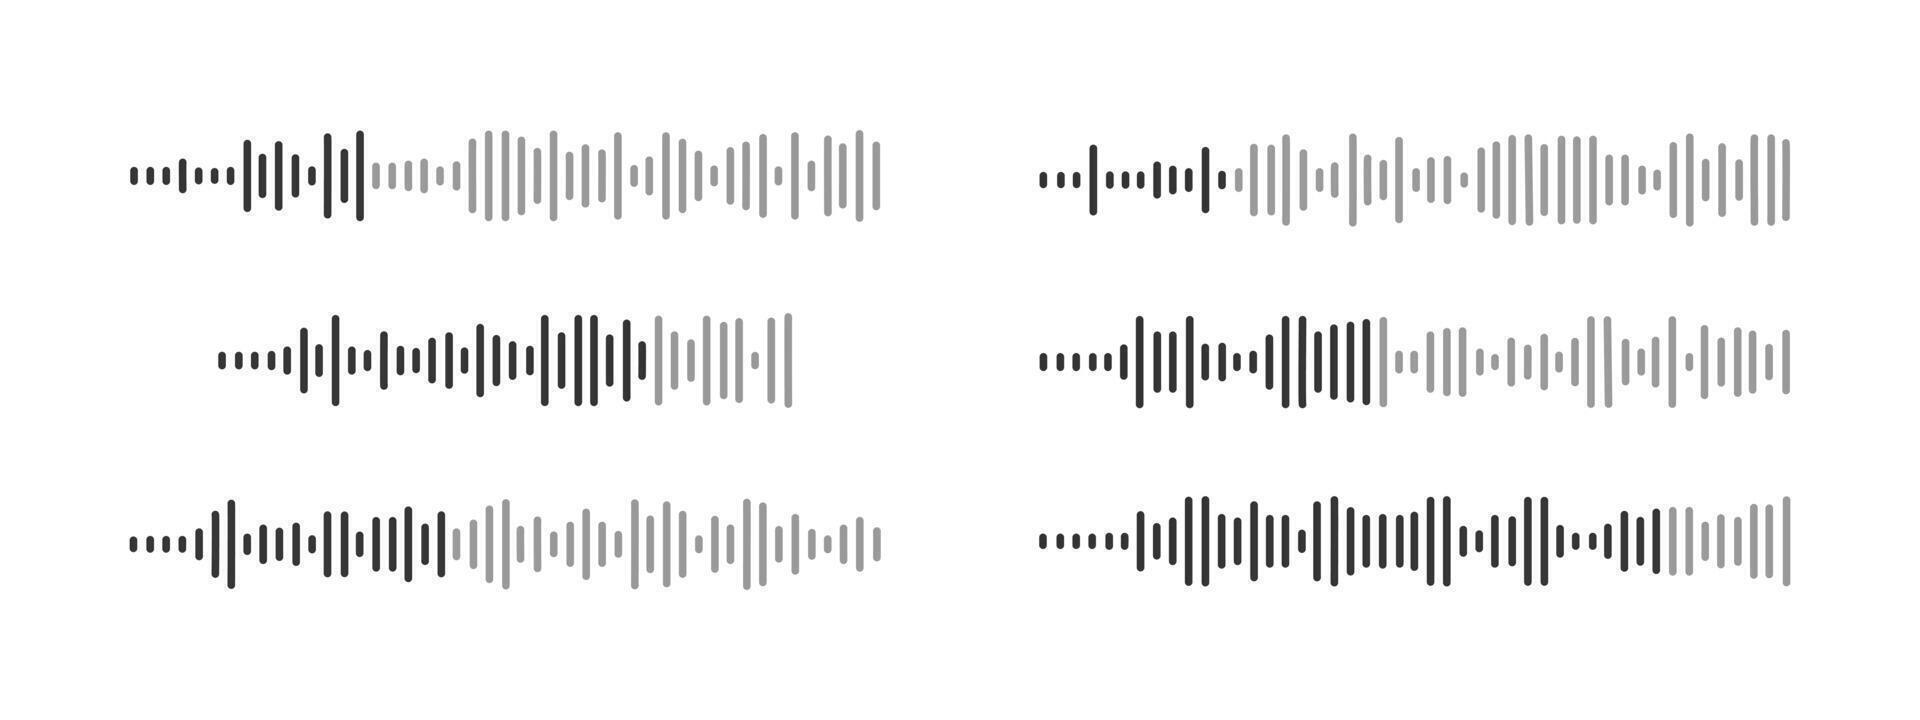 Set of sound wave icons. Audio file, voice chat, speech or song record, pulse, online conversation pictograms. Messenger, radio, podcast, player elements vector